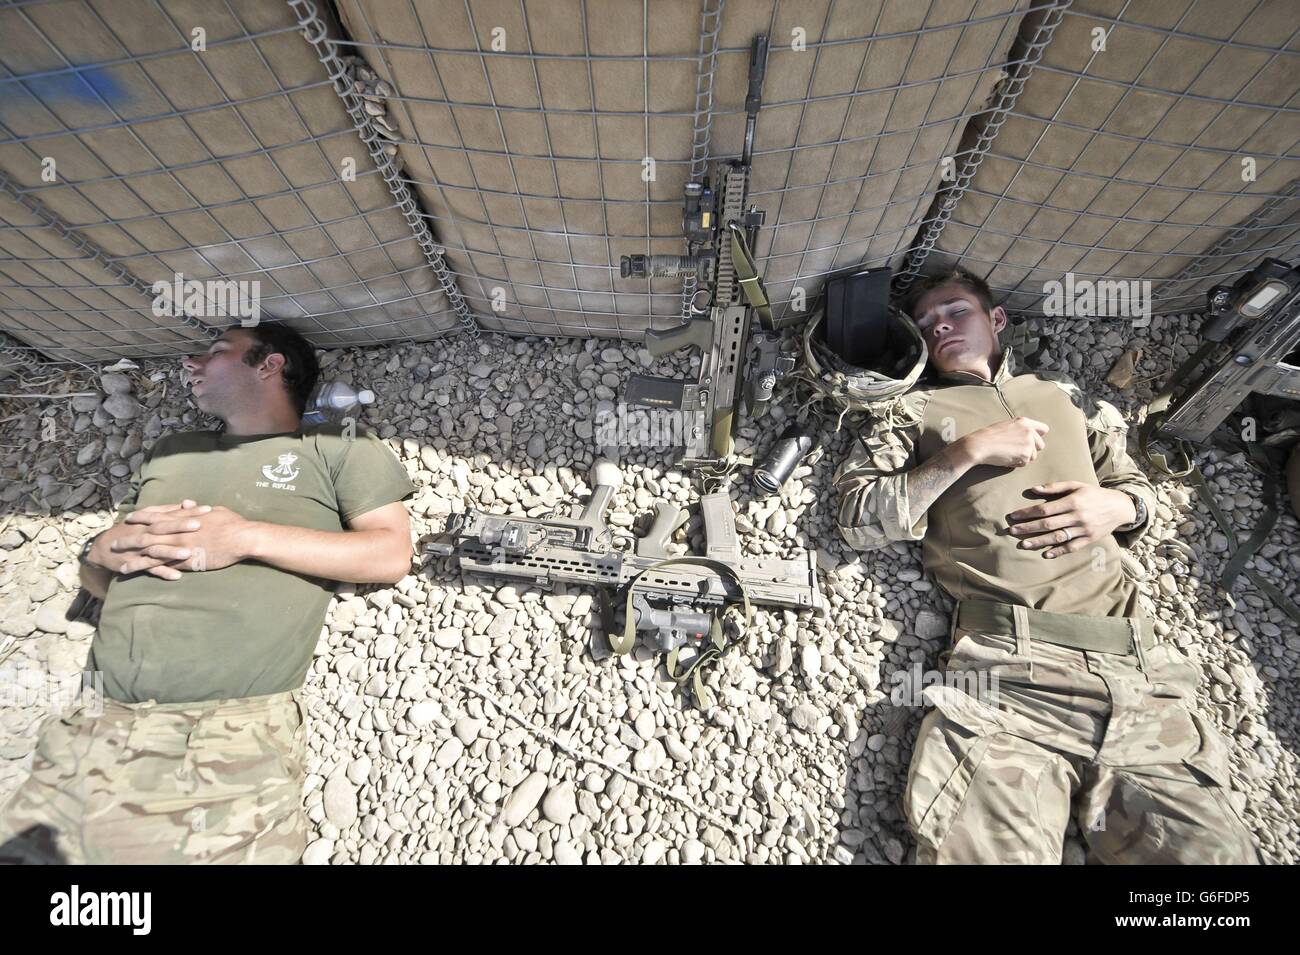 British Soldiers sleep next to a HESCO wall in a Patrol Base in the Helmand Province of Afghanistan, where the penultimate deployment, Operation Herrick 19 is underway. Stock Photo